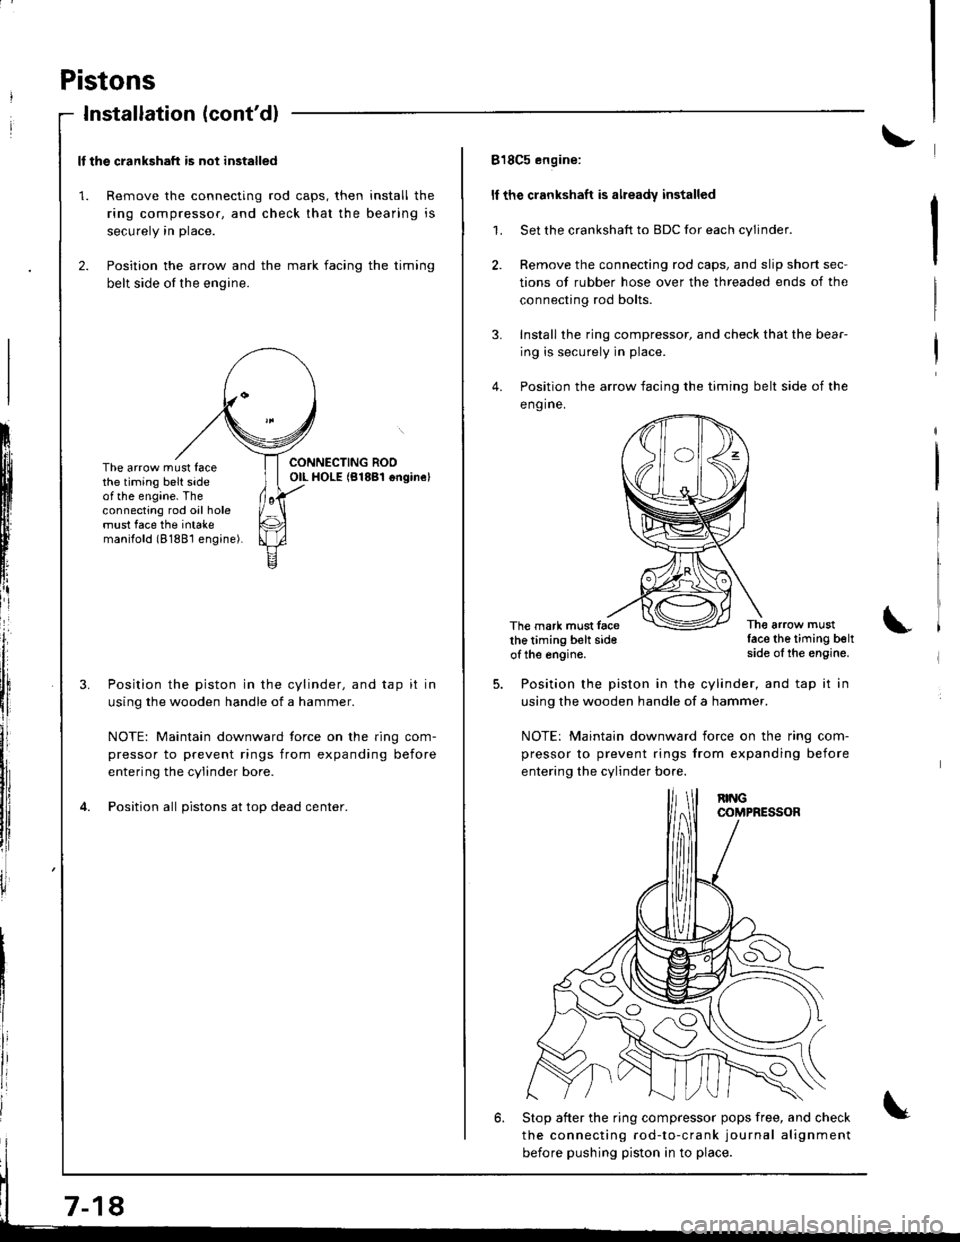 HONDA INTEGRA 1998 4.G User Guide I
i
Pistons
Installation (contdl
ll the crankshaft is not installed
1. Remove the connecting rod caps, then install the
ring compressor. and check that the bearing is
securely in place.
2. Position t